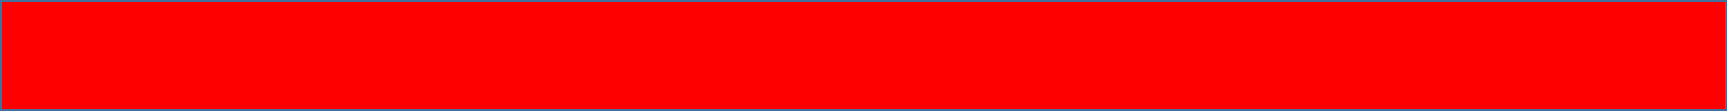 red bar.png